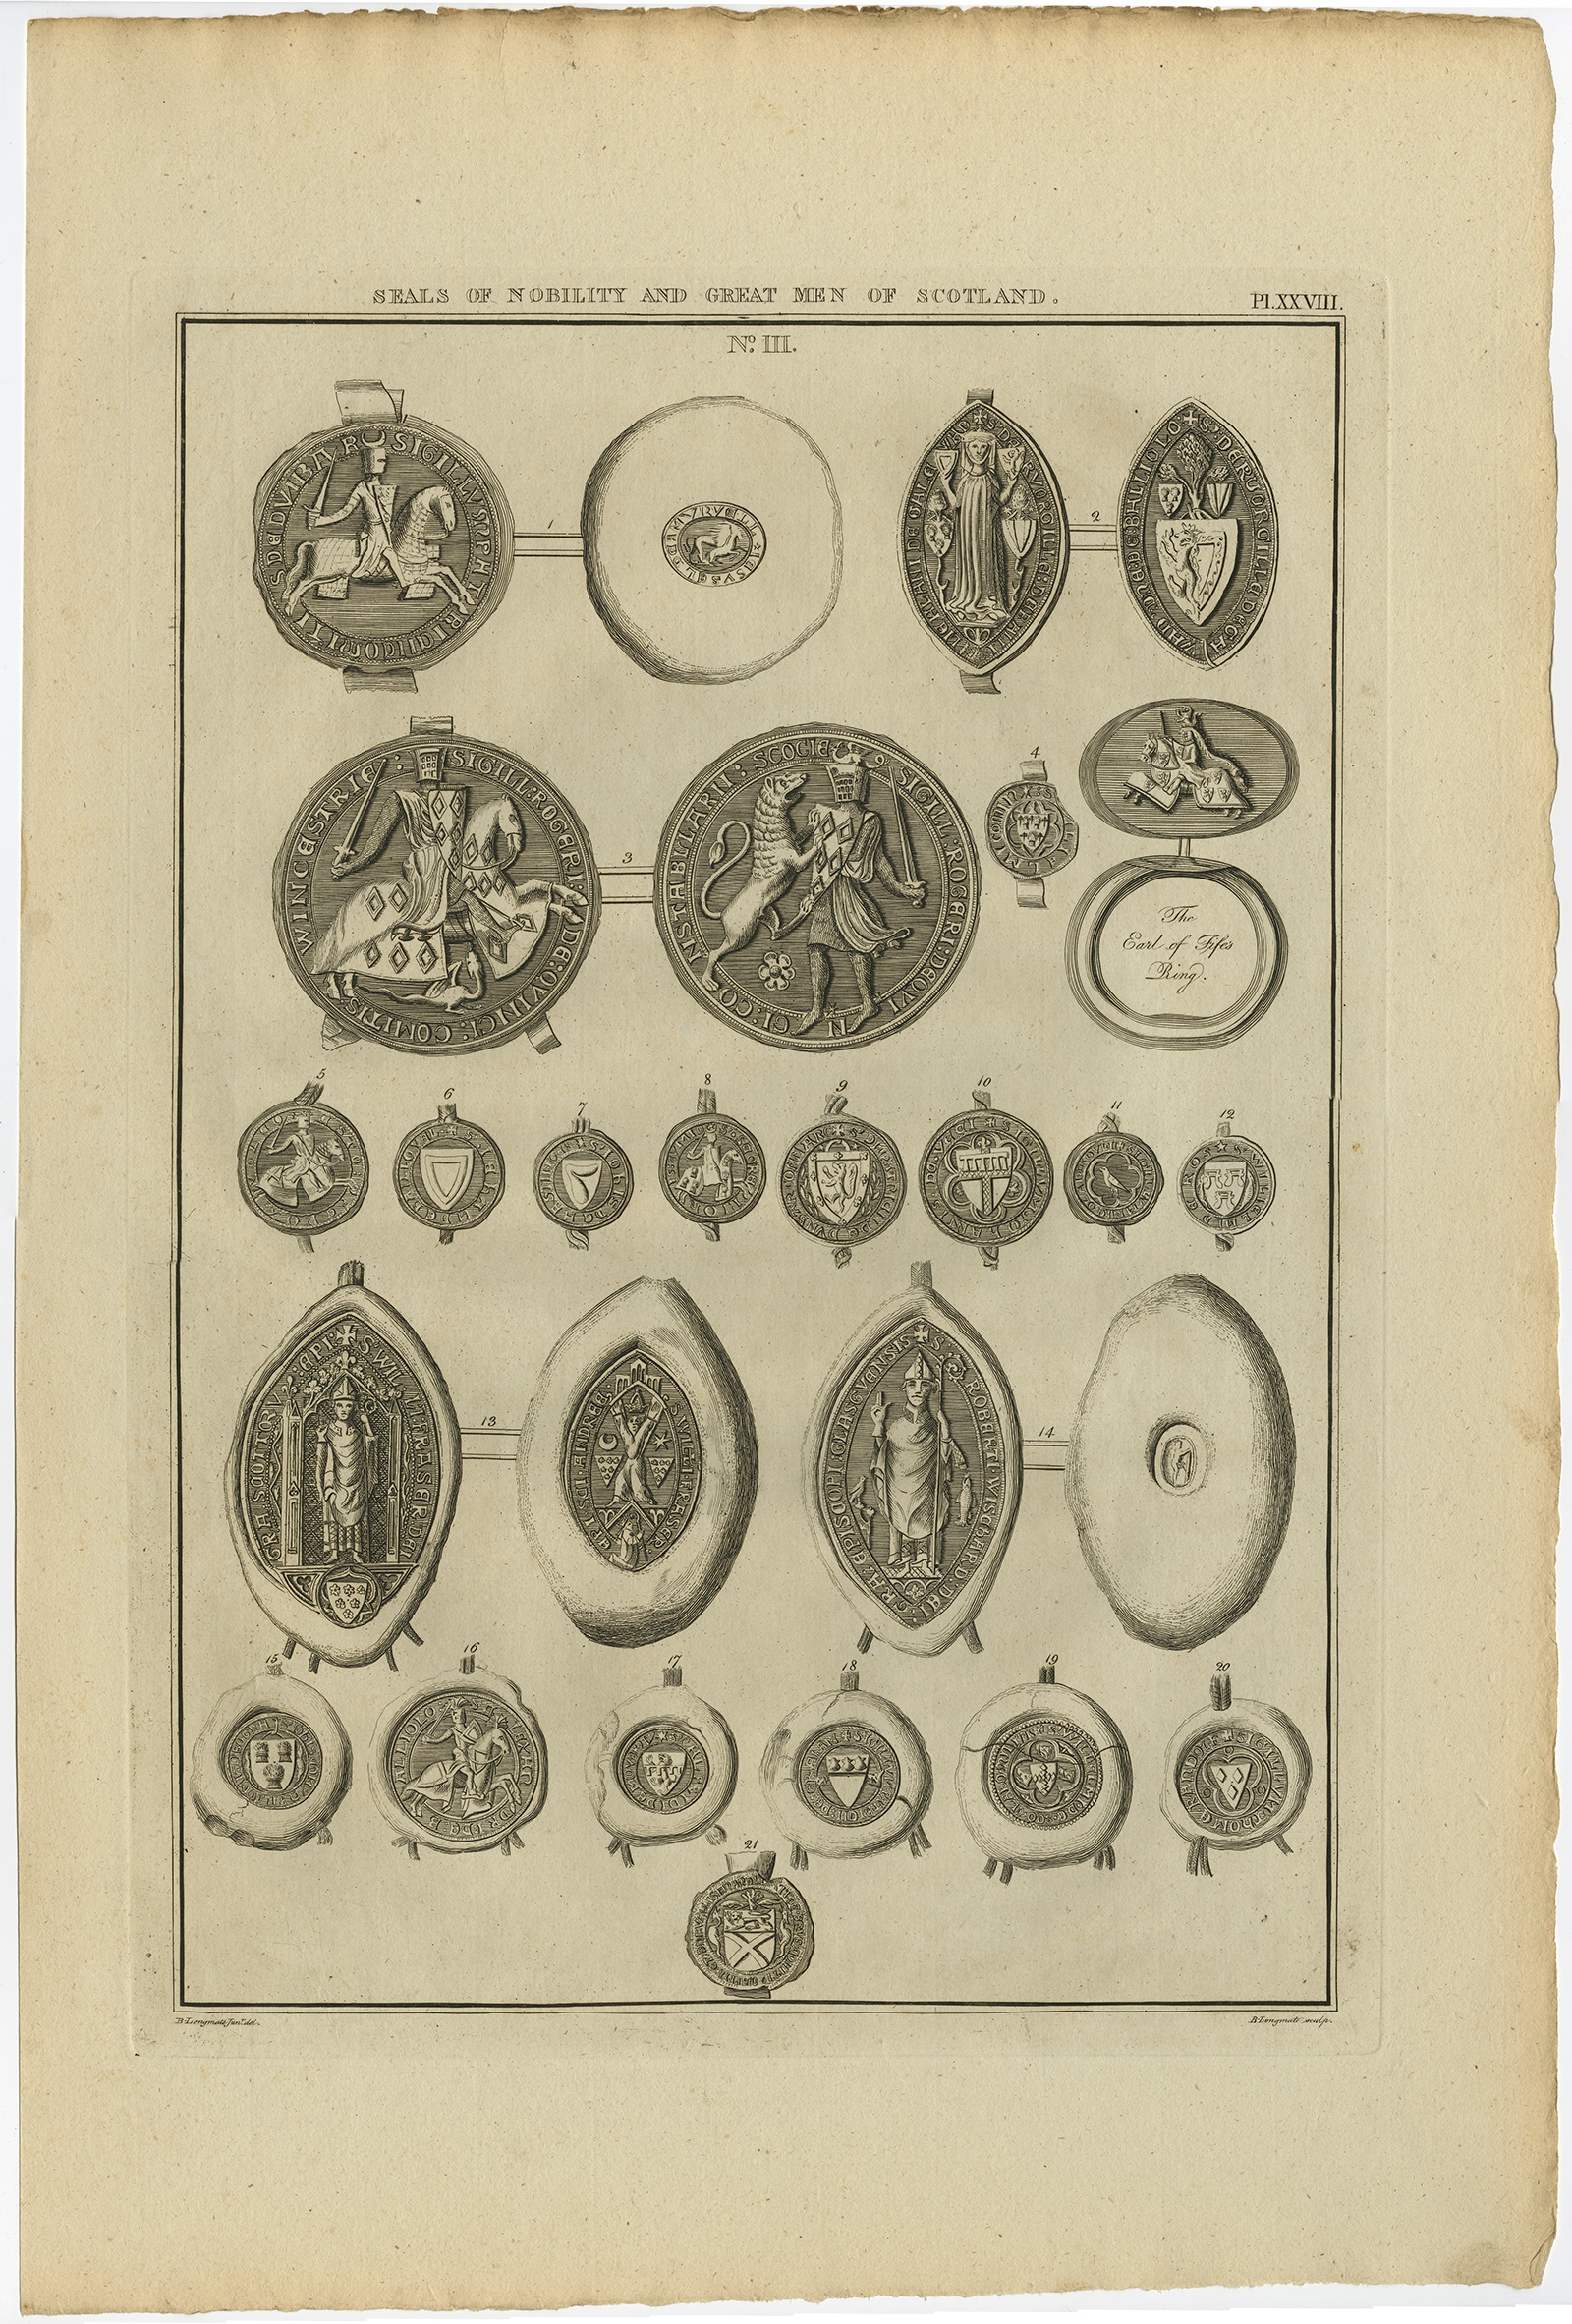 Antique Print of Seals of Nobility and important Men of Scotland